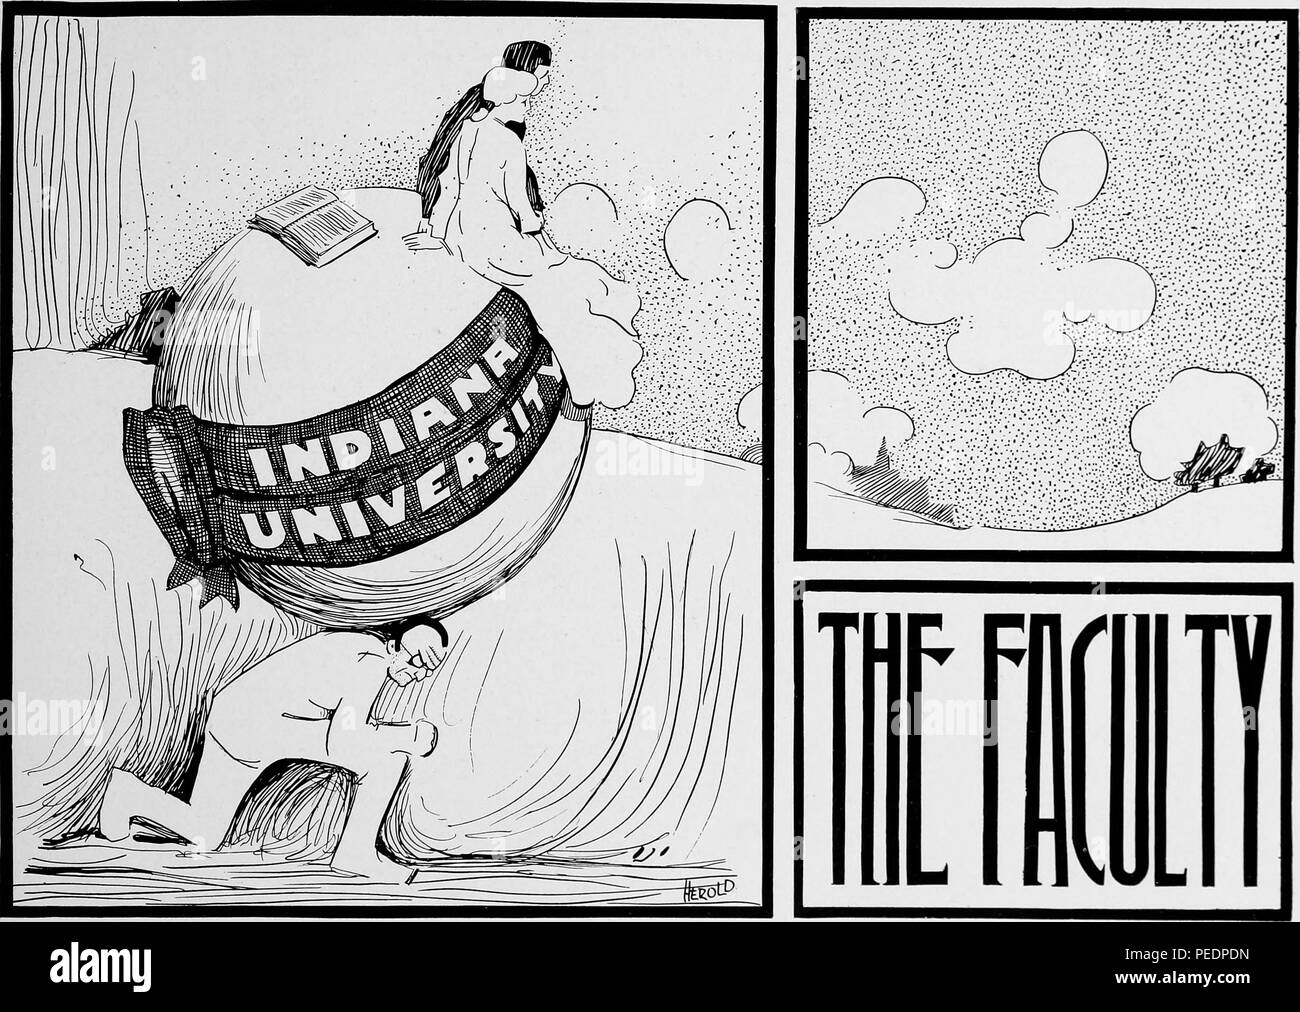 Black and white print, with three framed fields, in the largest of which a man (presumably an Indiana University faculty member) acts as Atlas, balancing a globe, wreathed with a banner reading 'Indiana University, ' and surmounted by an open book and a man and woman (presumably students) and with the words 'The Faculty' in the lower right field, published as the frontispiece to the Indiana University faculty list and photograph page in the University authored volume 'Arbutus', 1894. Courtesy Internet Archive. () Stock Photo